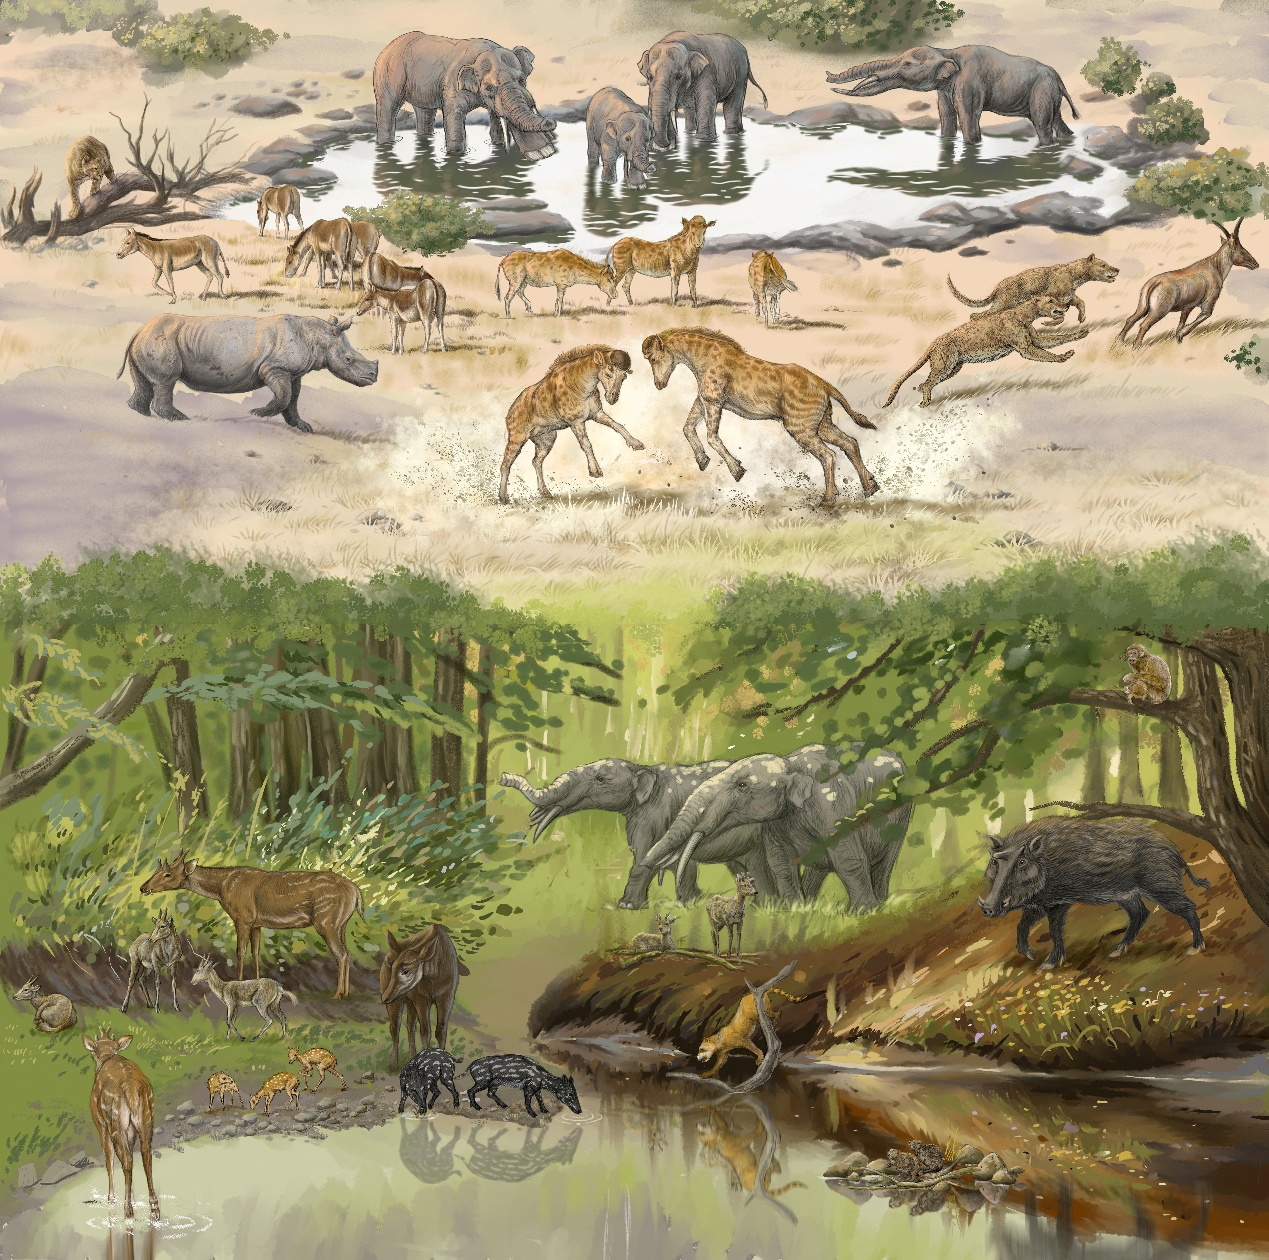 Diverse community of animals that lived alongside the newly described giraffe forerunner Discokeryx xiezhi